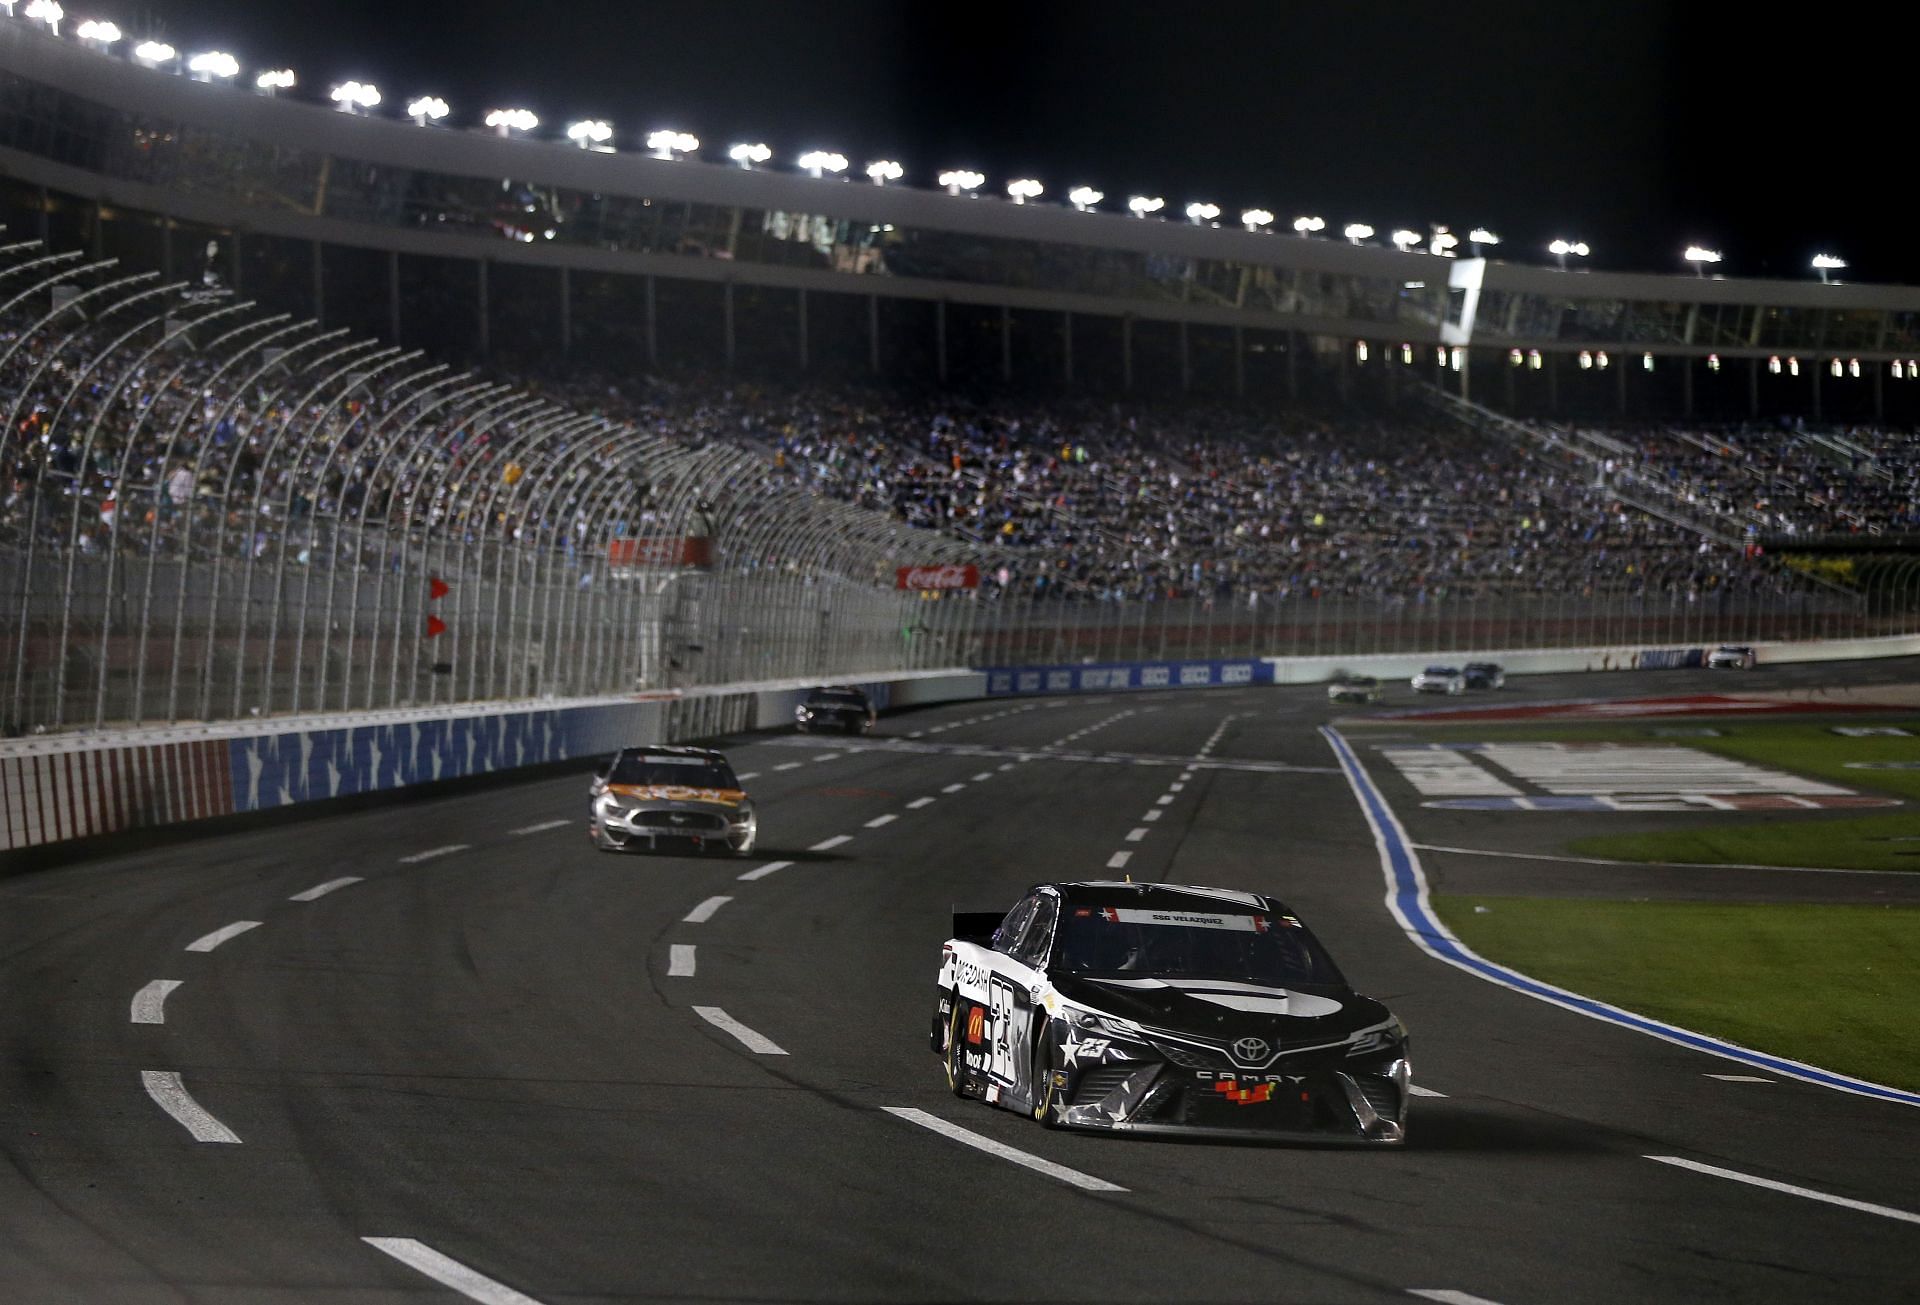 NASCAR 2022 Where to watch Coca-Cola 600 at Charlotte Motor Speedway? Time, TV Schedule and Live Stream